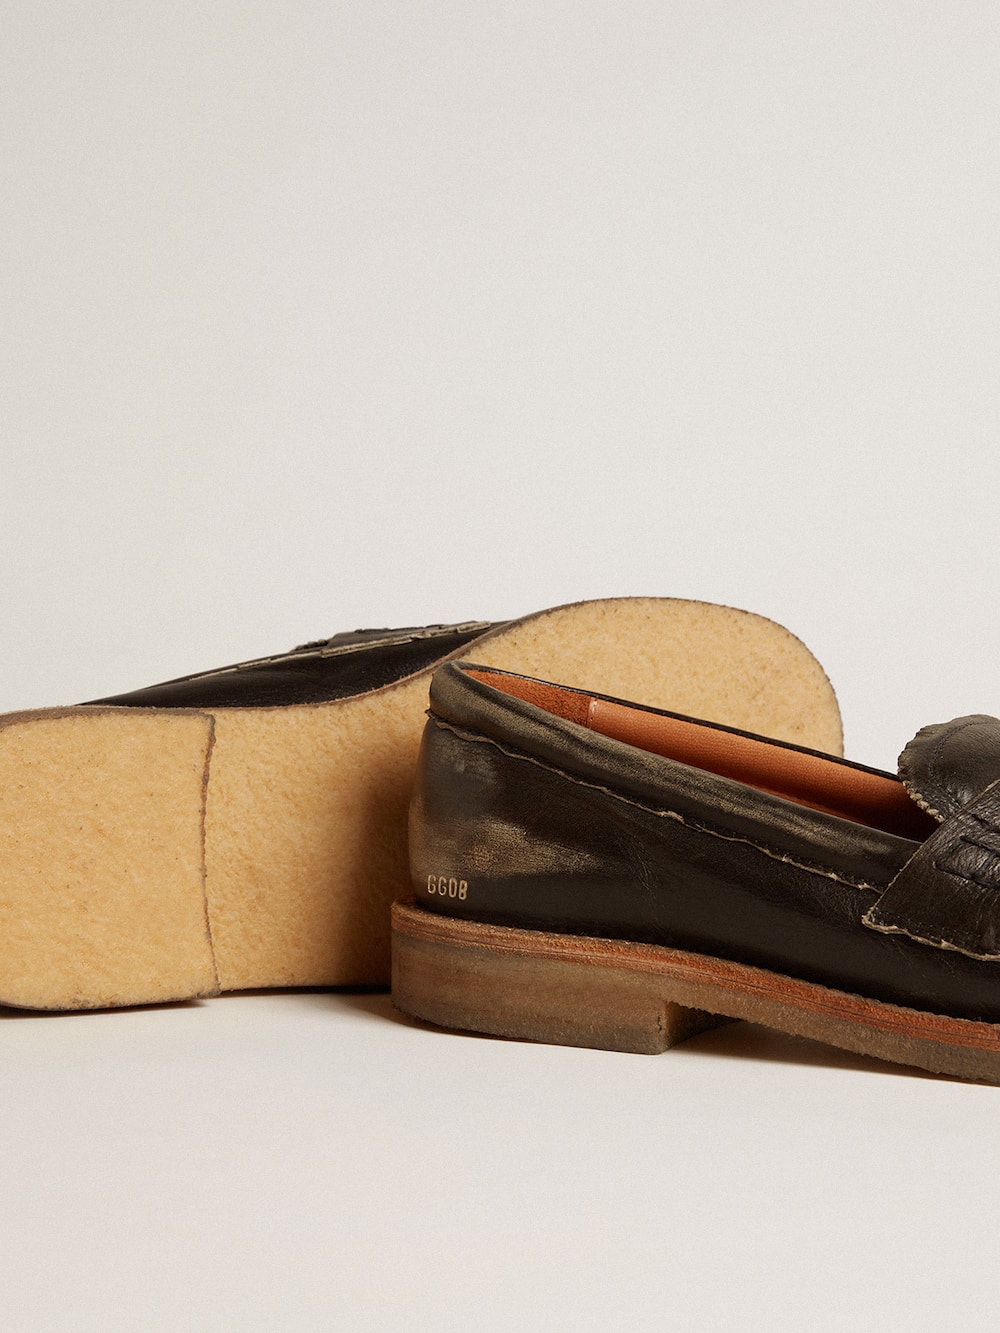 Golden Goose - Women’s Jerry loafer in black leather in 